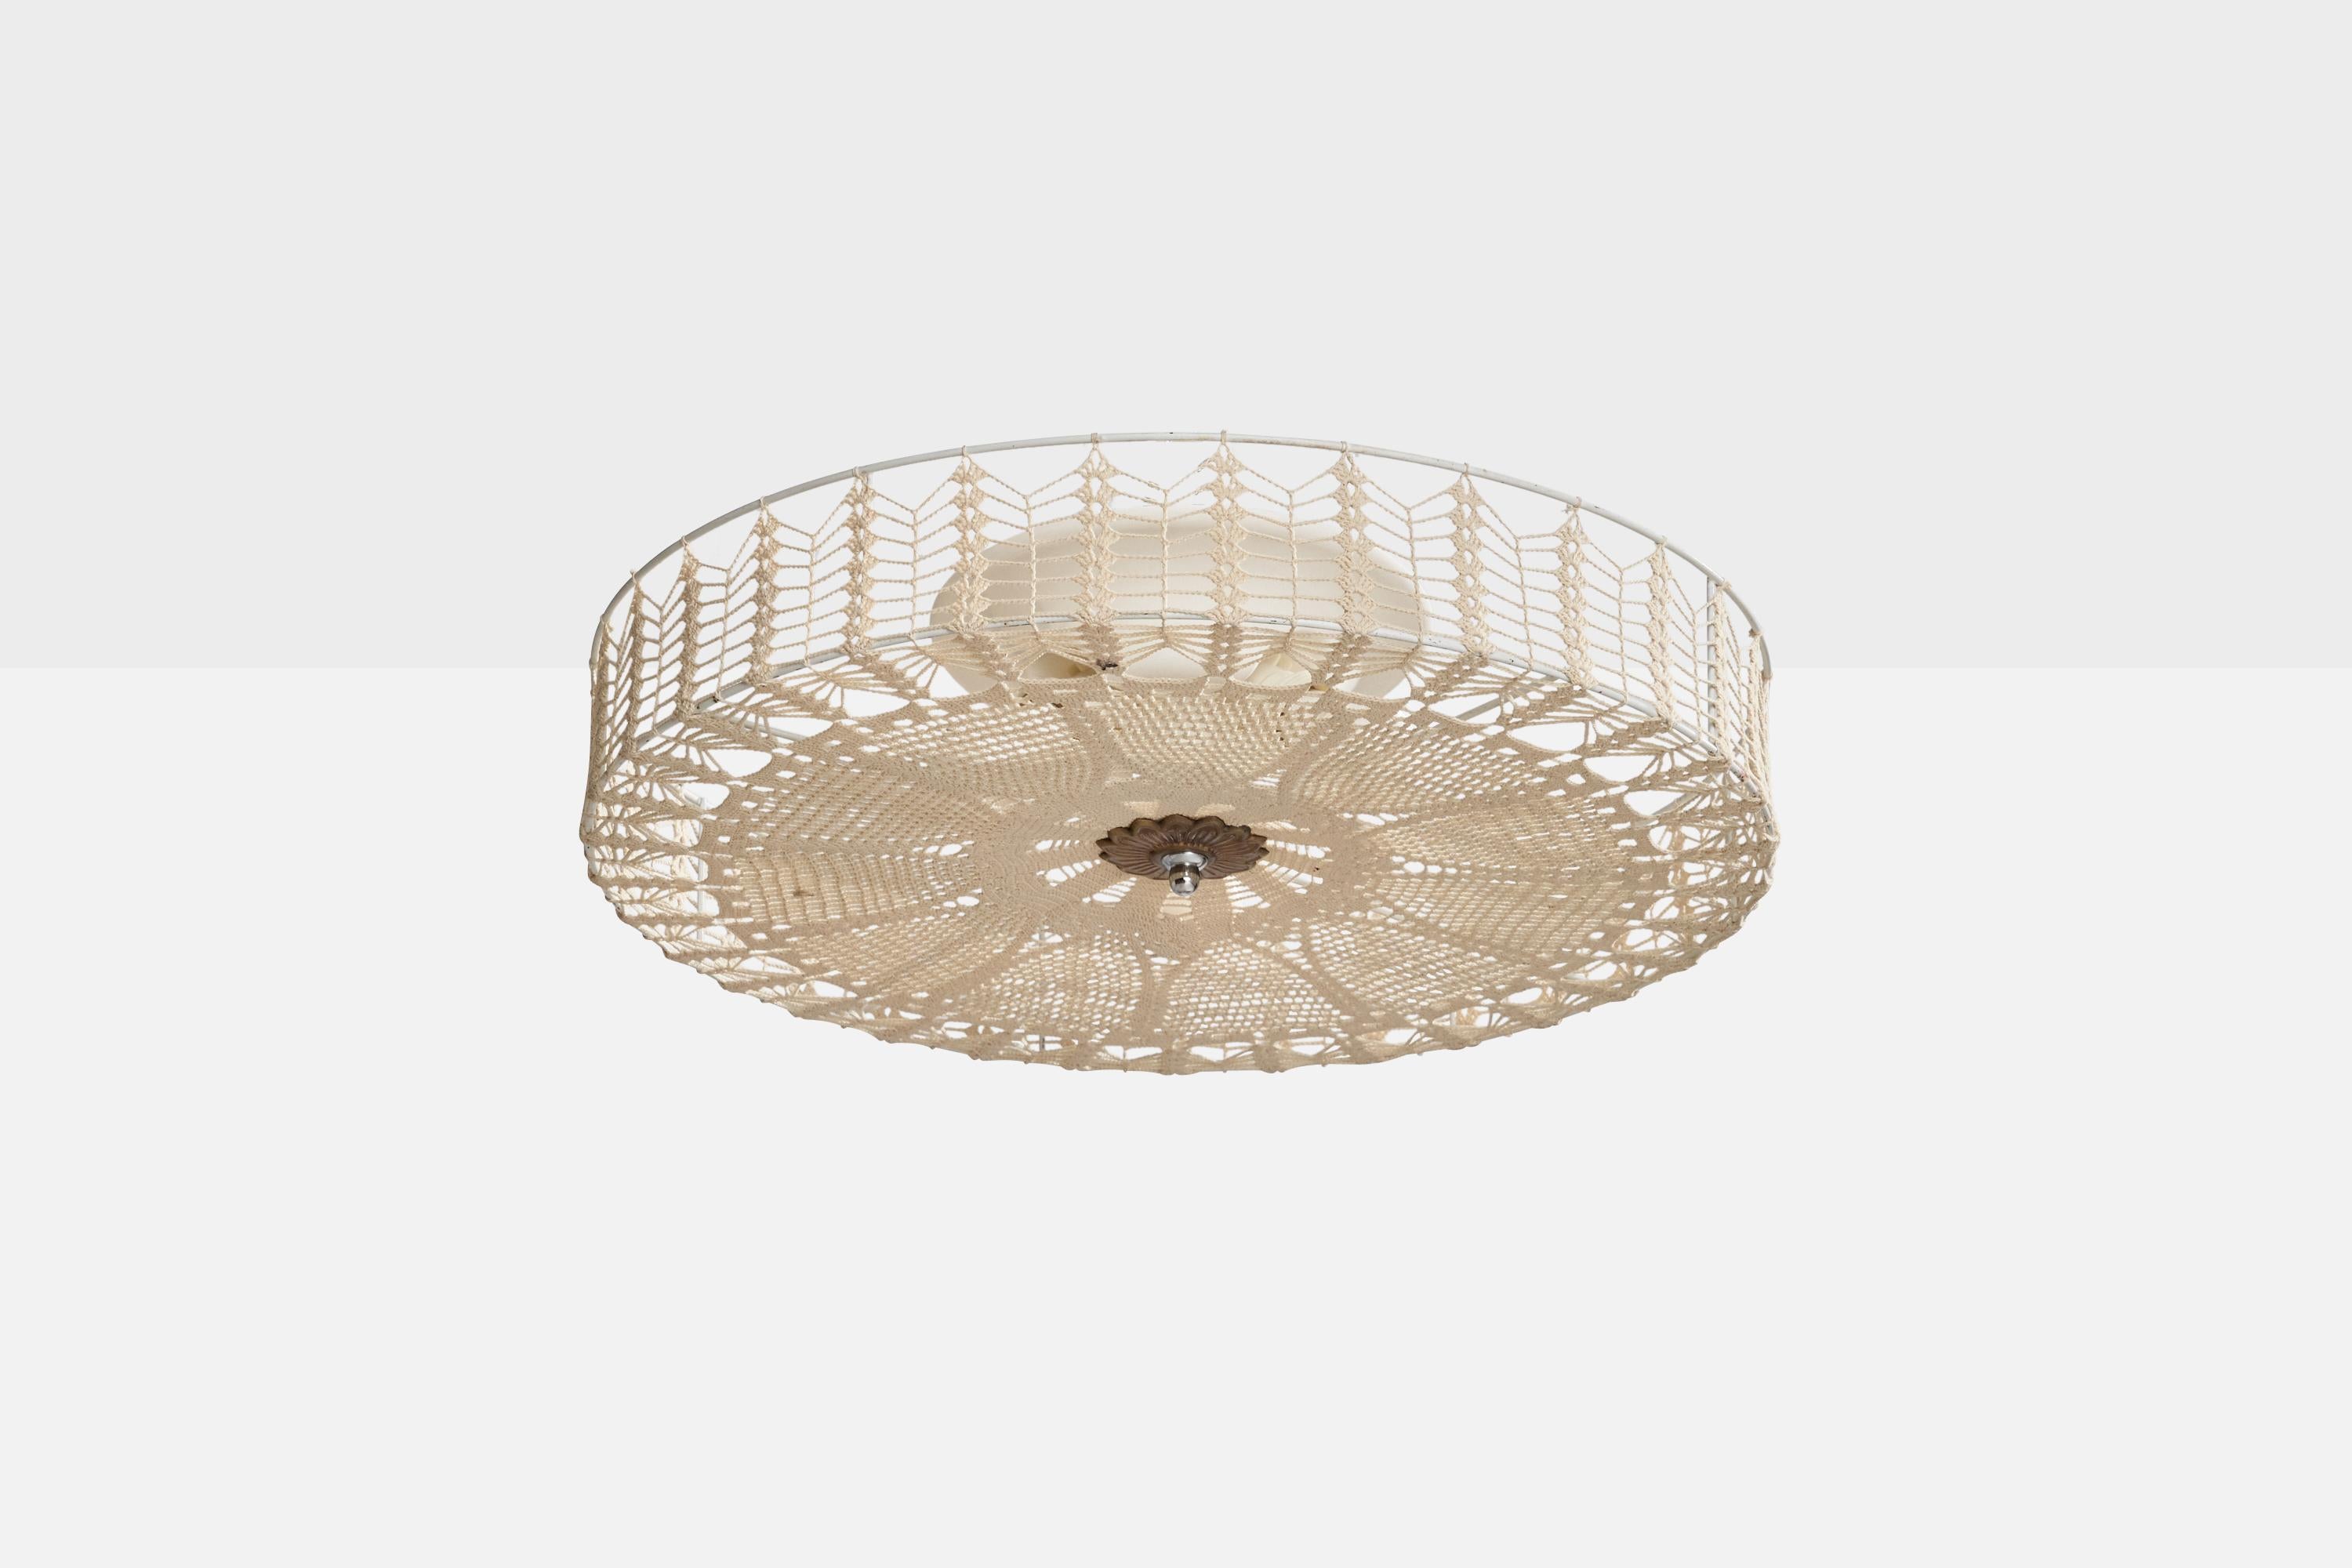 A metal, brass and hand-embroidered fabric flush mount designed and produced in Sweden, c. 1960s.

Dimensions of canopy (inches): 8.5” H x 5” Diameter
Socket takes standard E-26 bulbs. 3 socket.There is no maximum wattage stated on the fixture. All